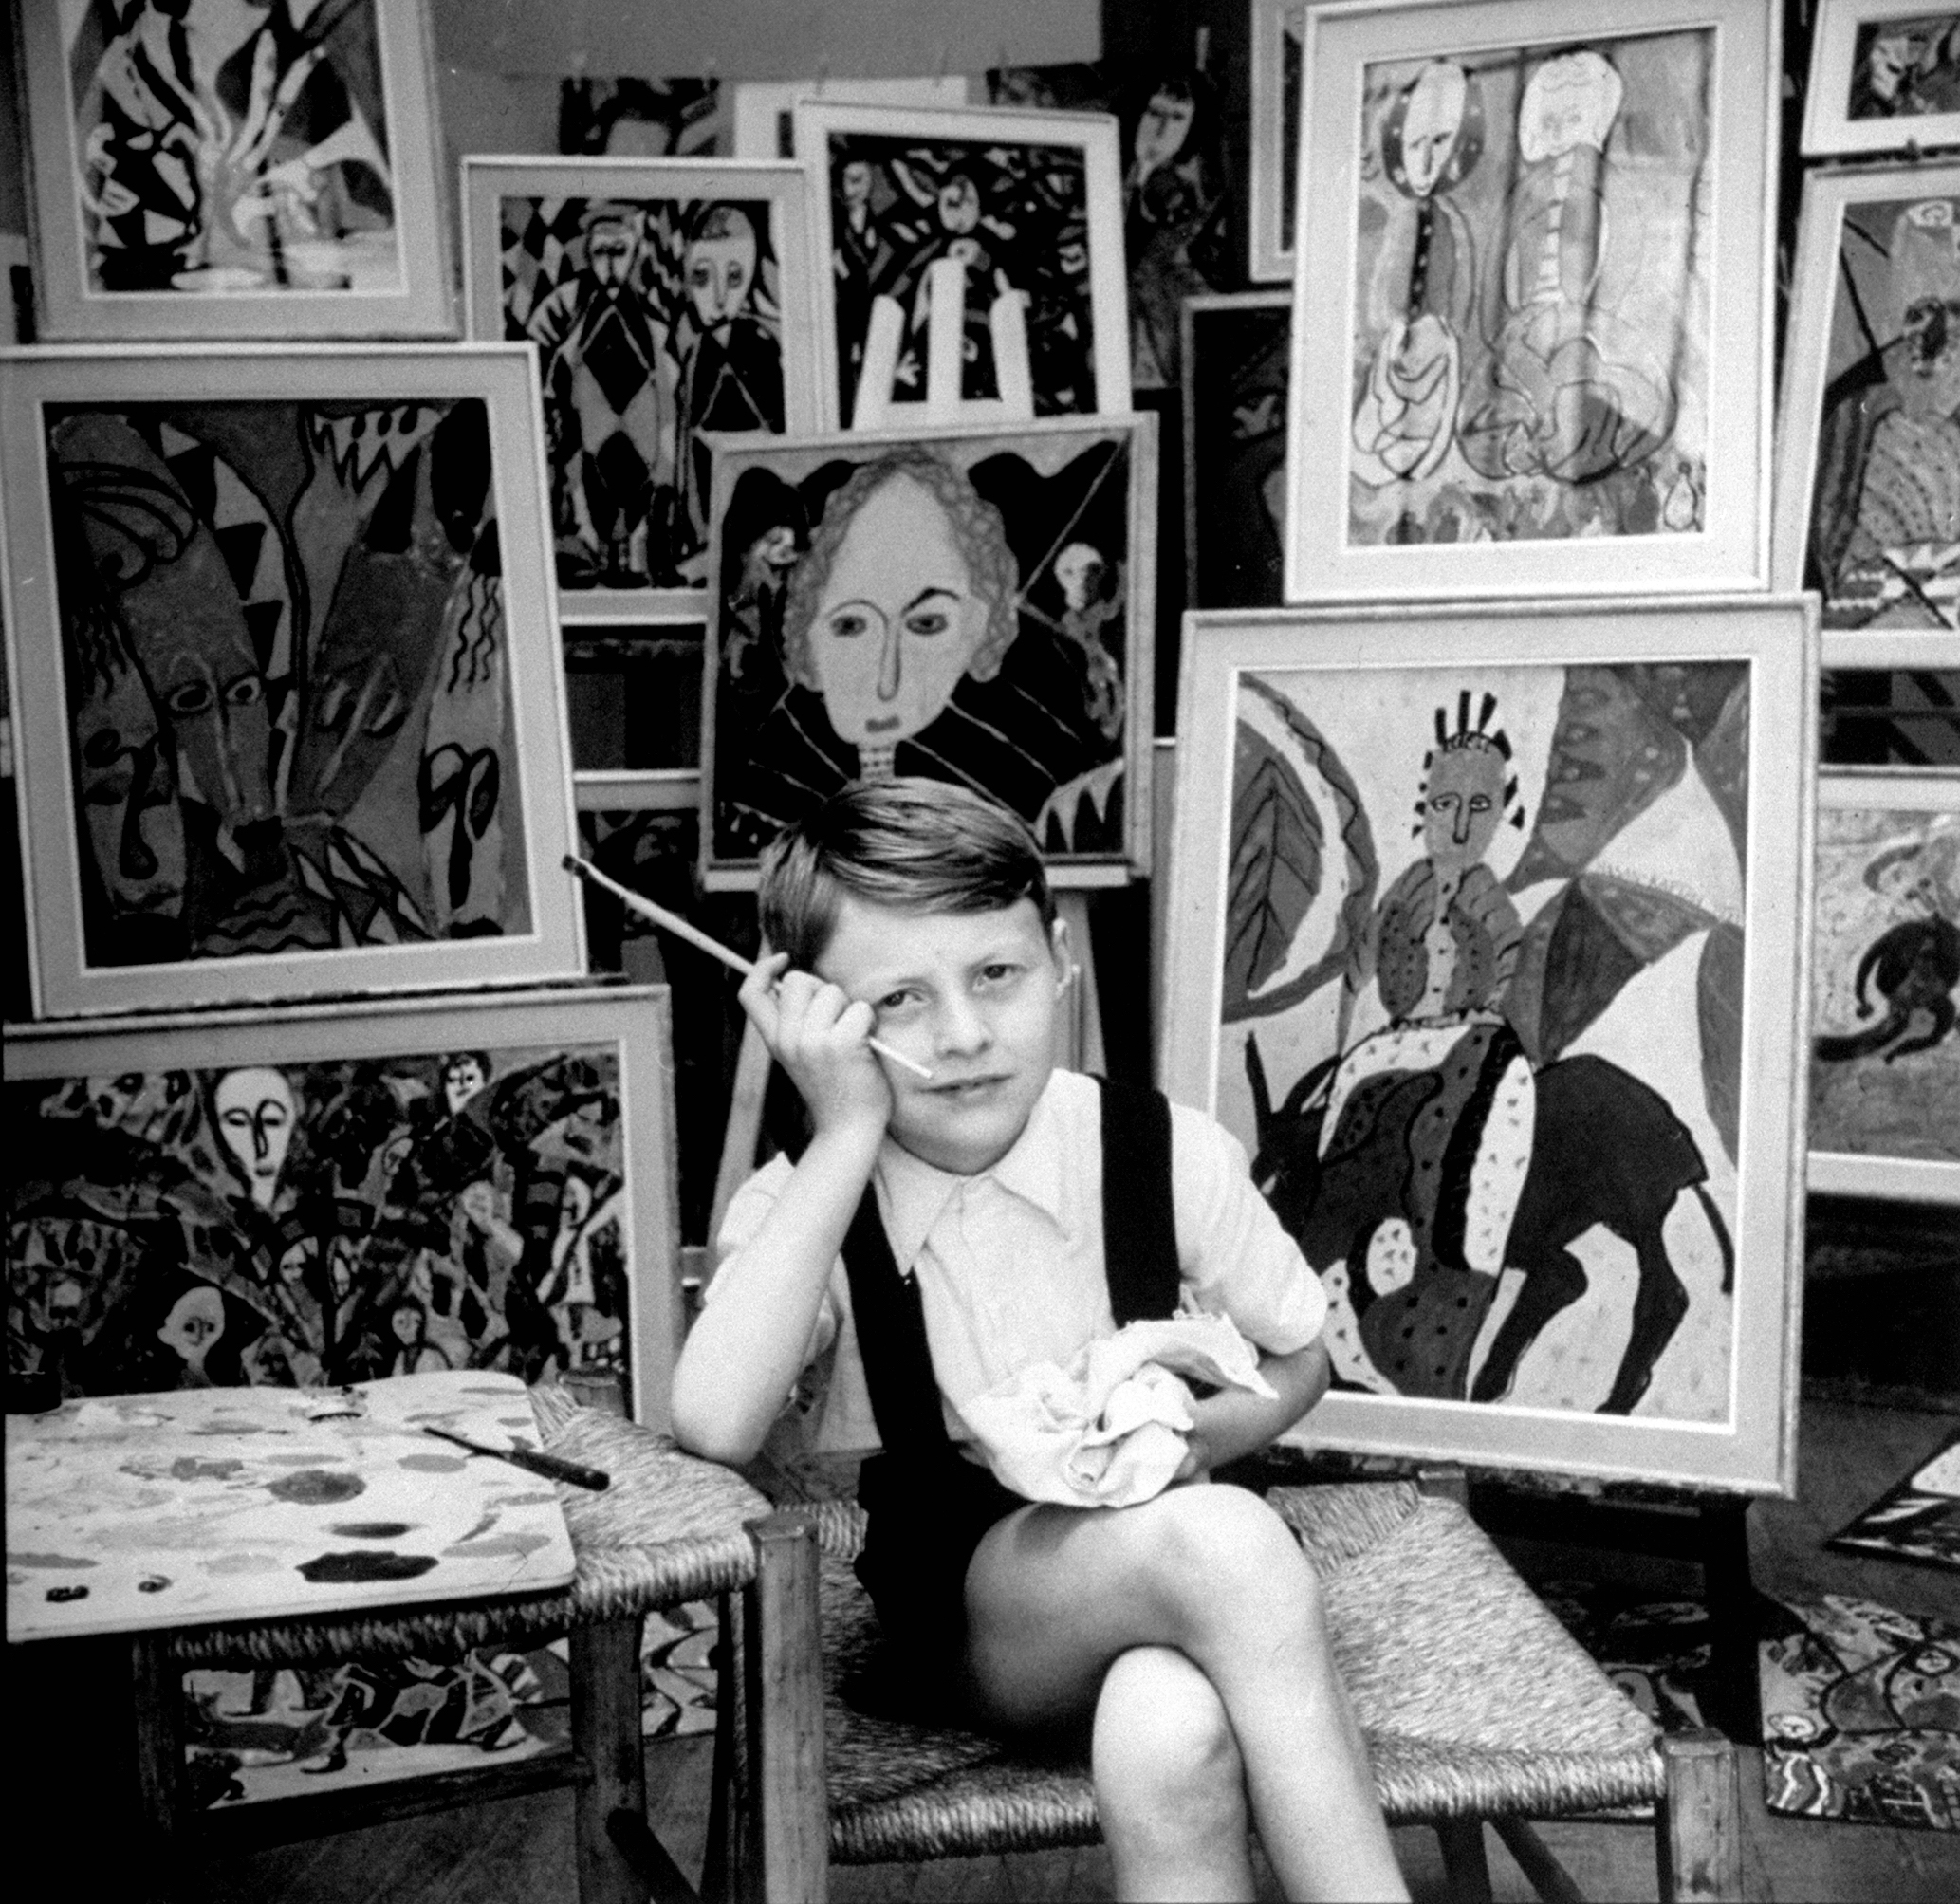 Nine year old prodigy, Hansan Kaptan, Turkish child, has an exhibition at a gallery in Paris, France, 1951.